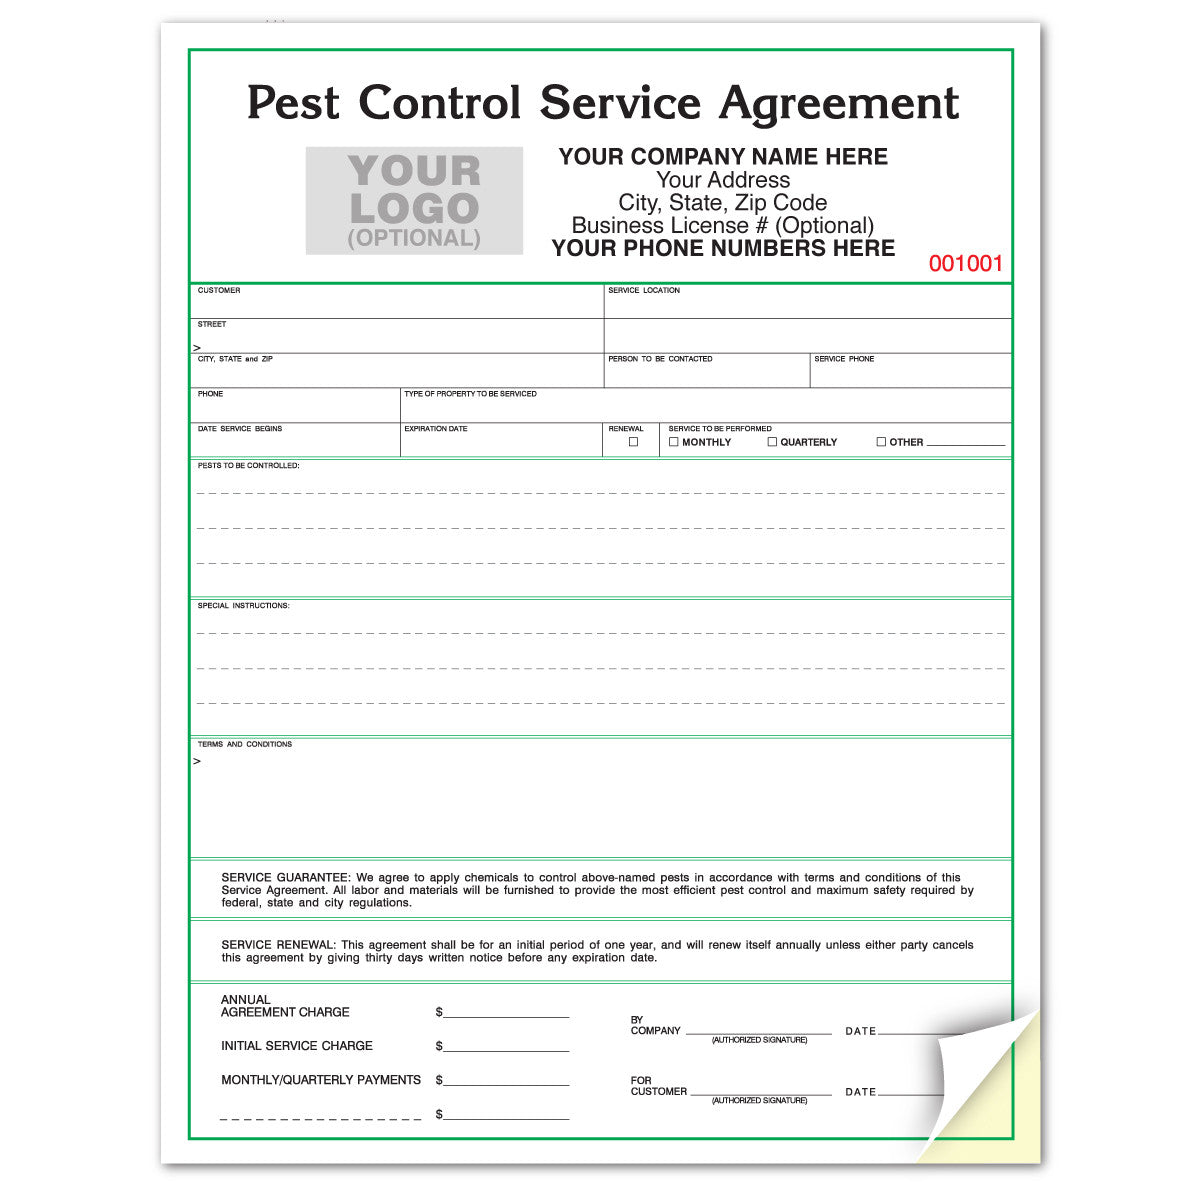 Pest Control Service Contract / Agreement